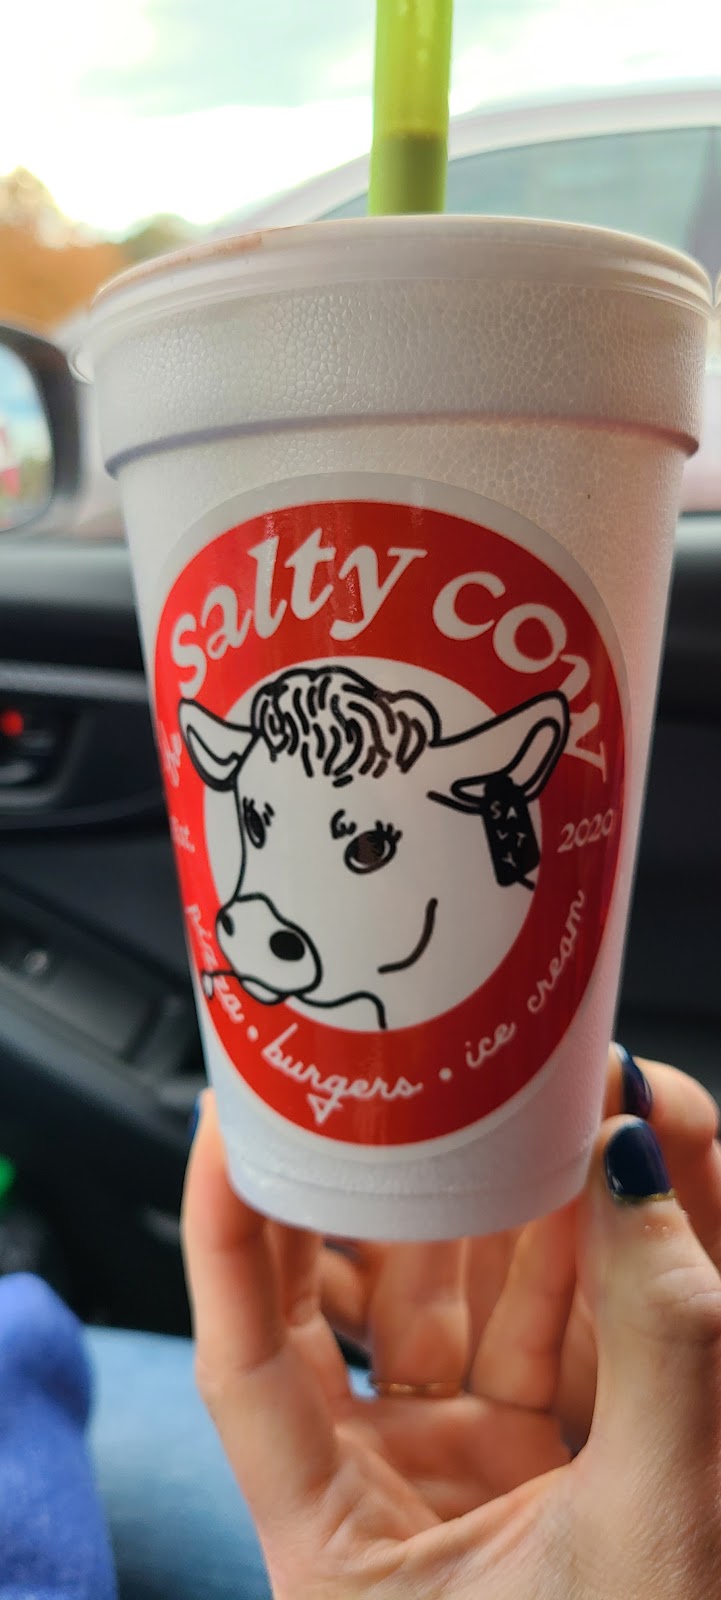 The Salty Cow | 840 E Street Rd, West Chester, PA 19382 | Phone: (610) 399-0900